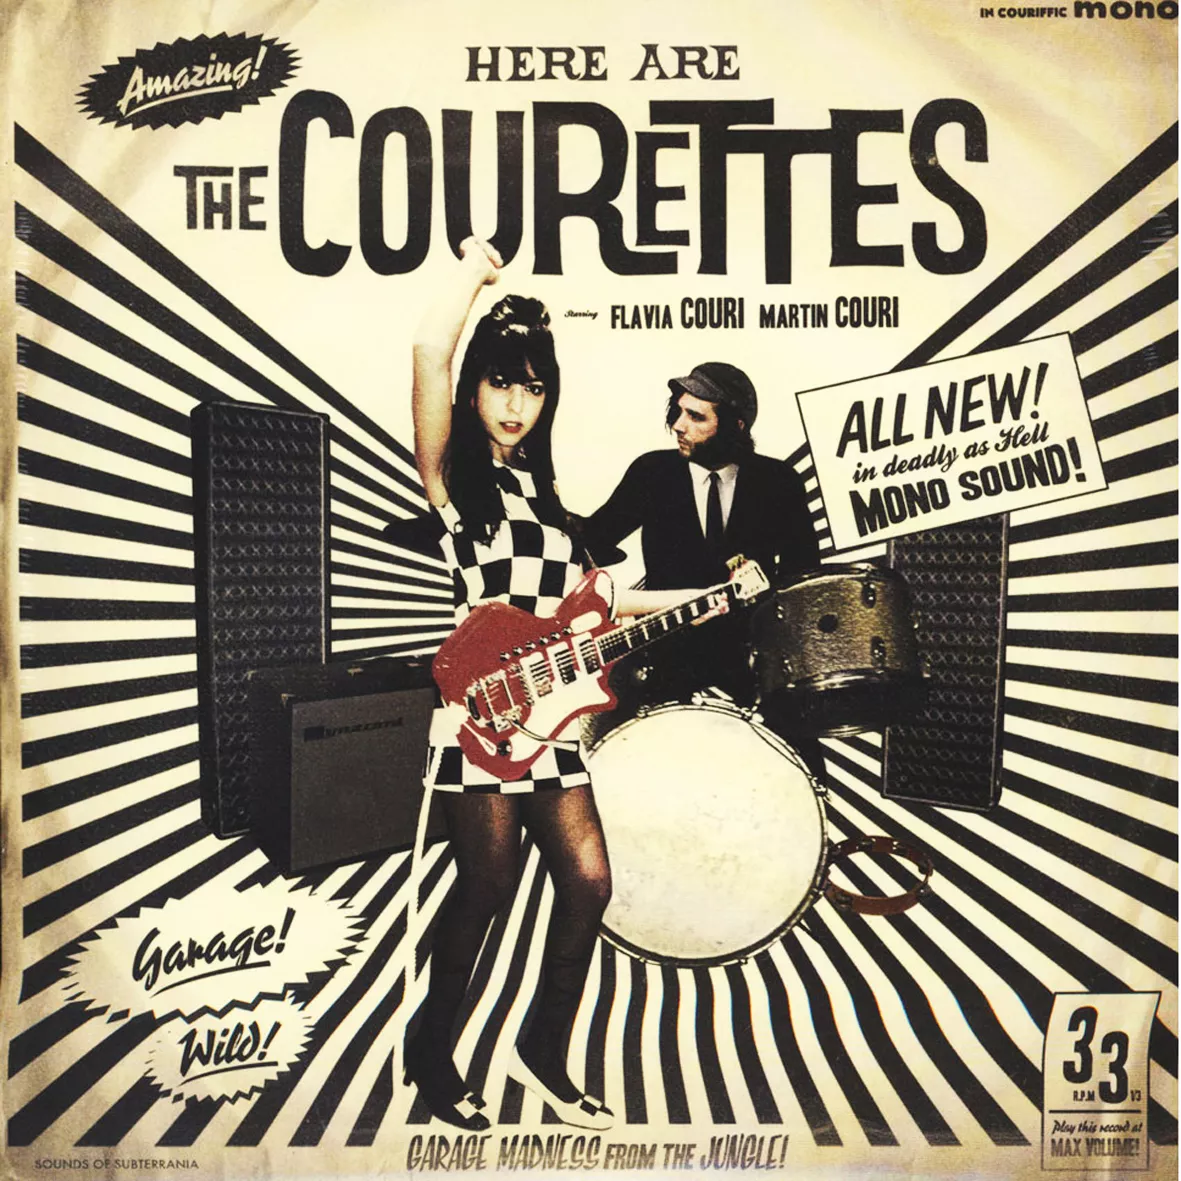 Here Are The Courettes - The Courettes